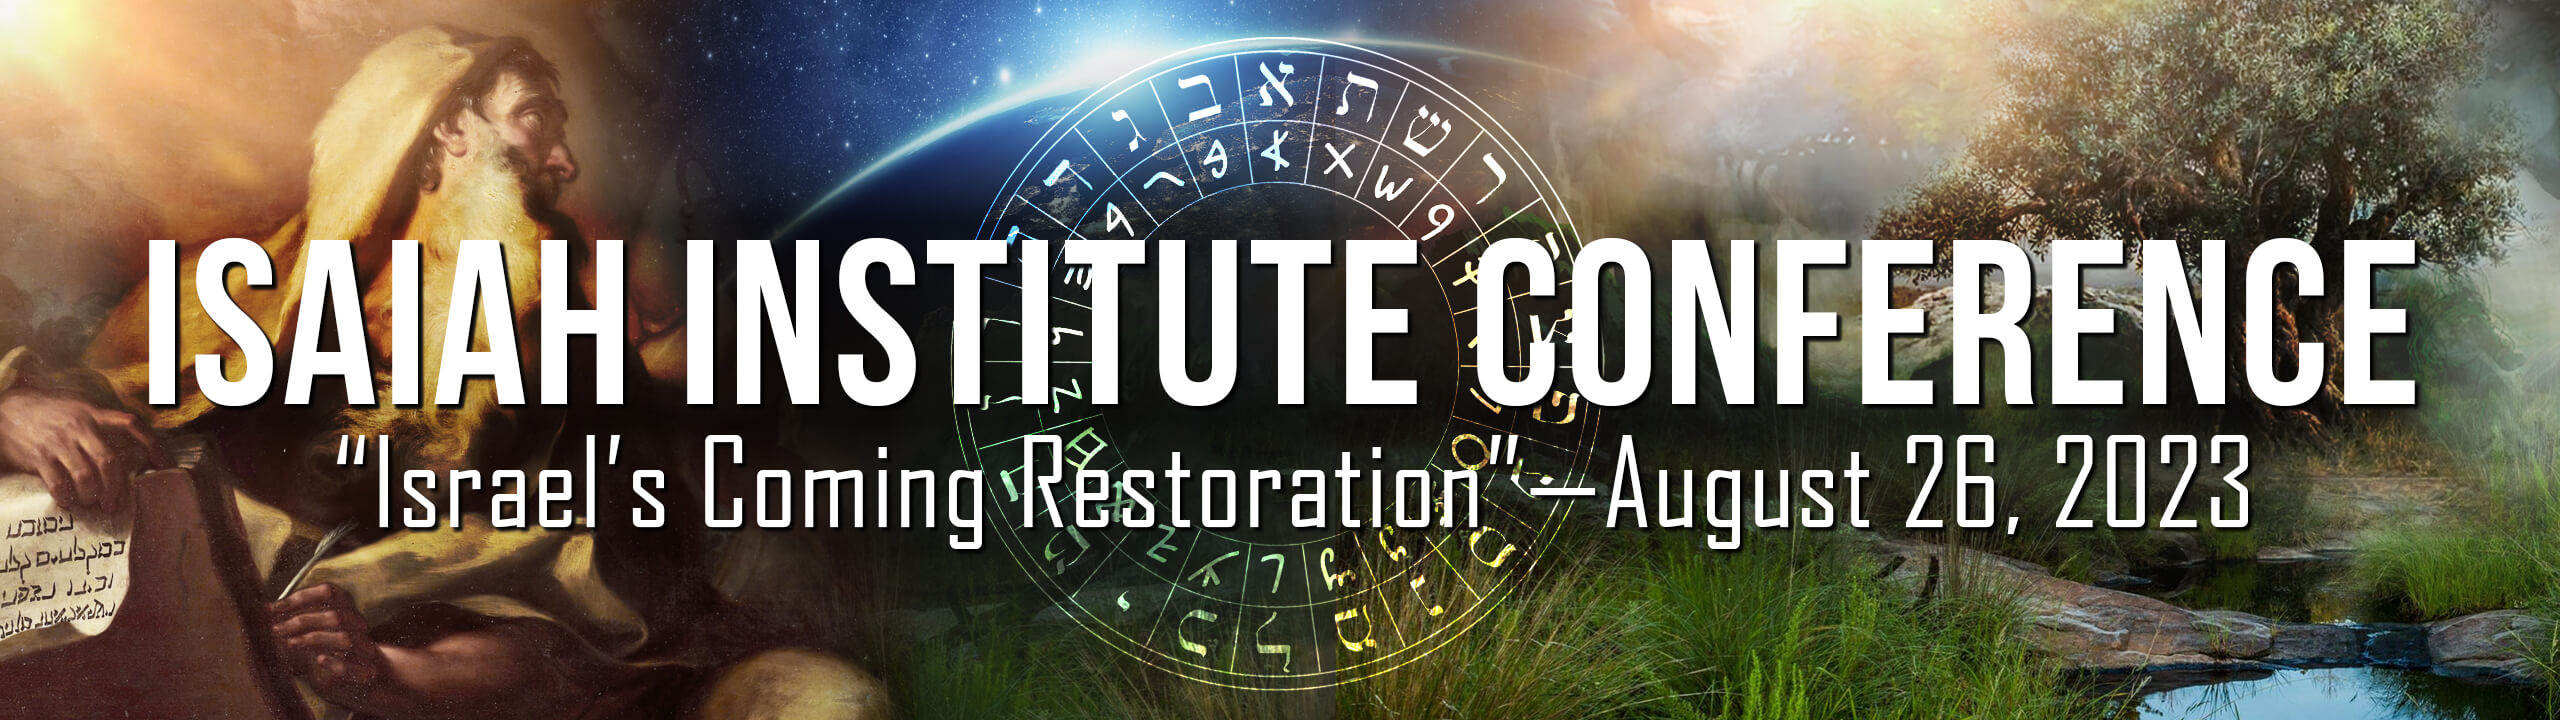 Isaiah Institute conference banner AUGUST 2023 (1)